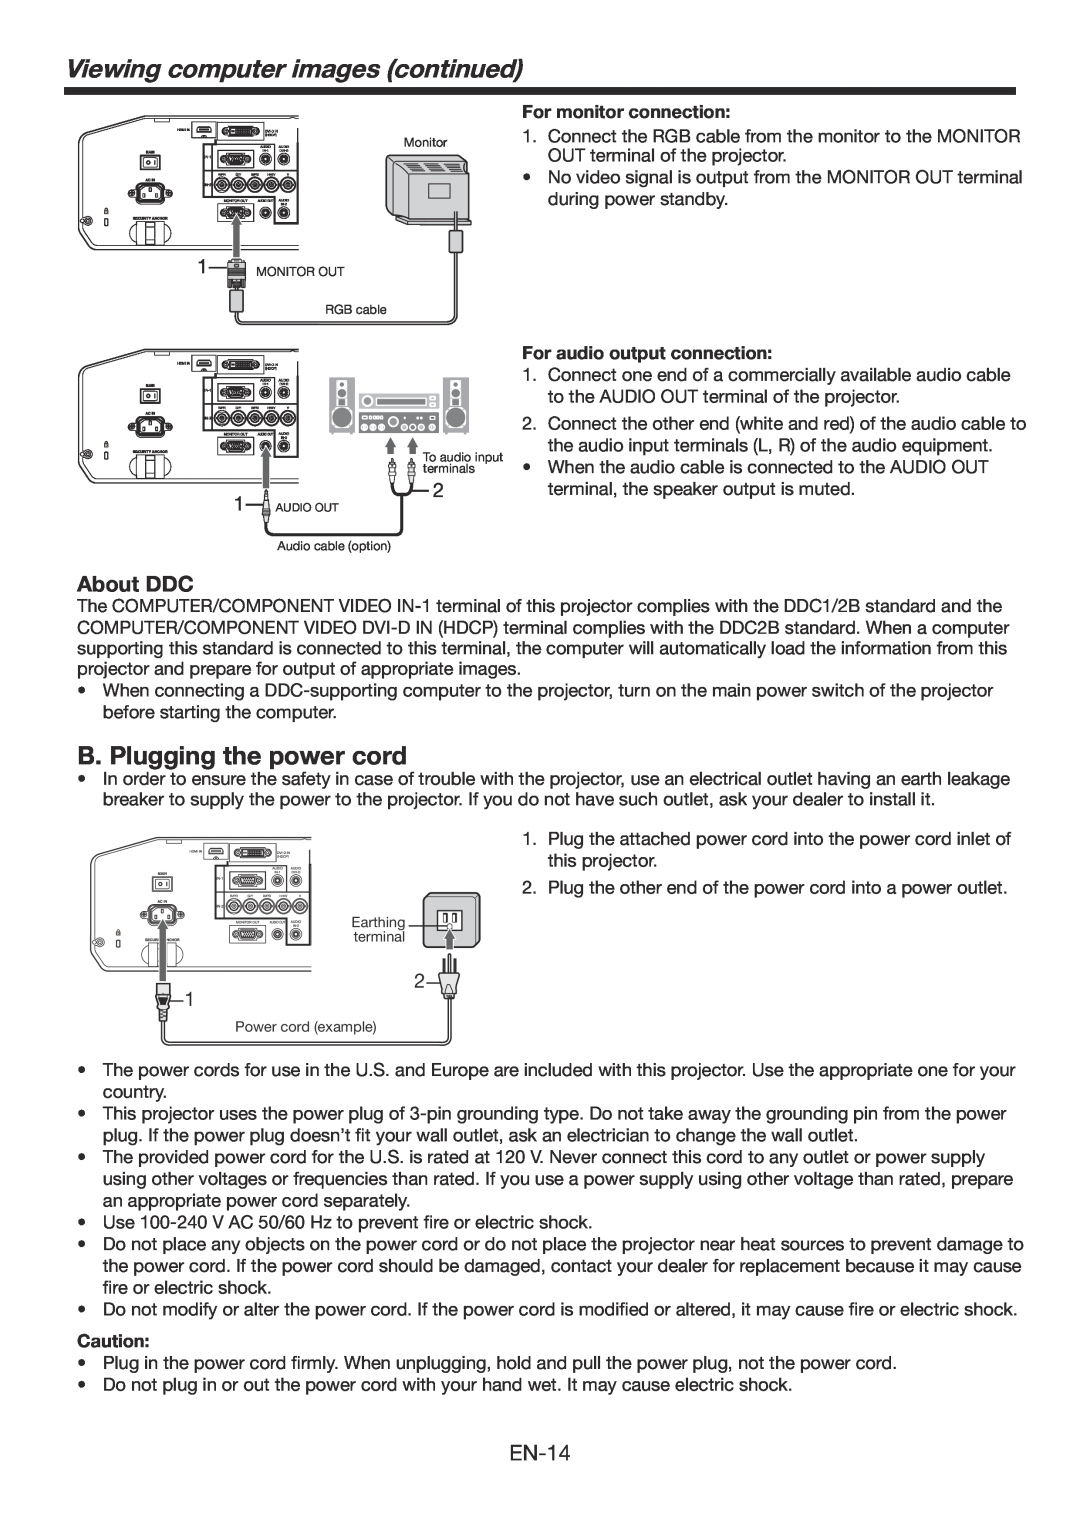 Mitsumi electronic WD3300U user manual Viewing computer images continued, B. Plugging the power cord, About DDC 